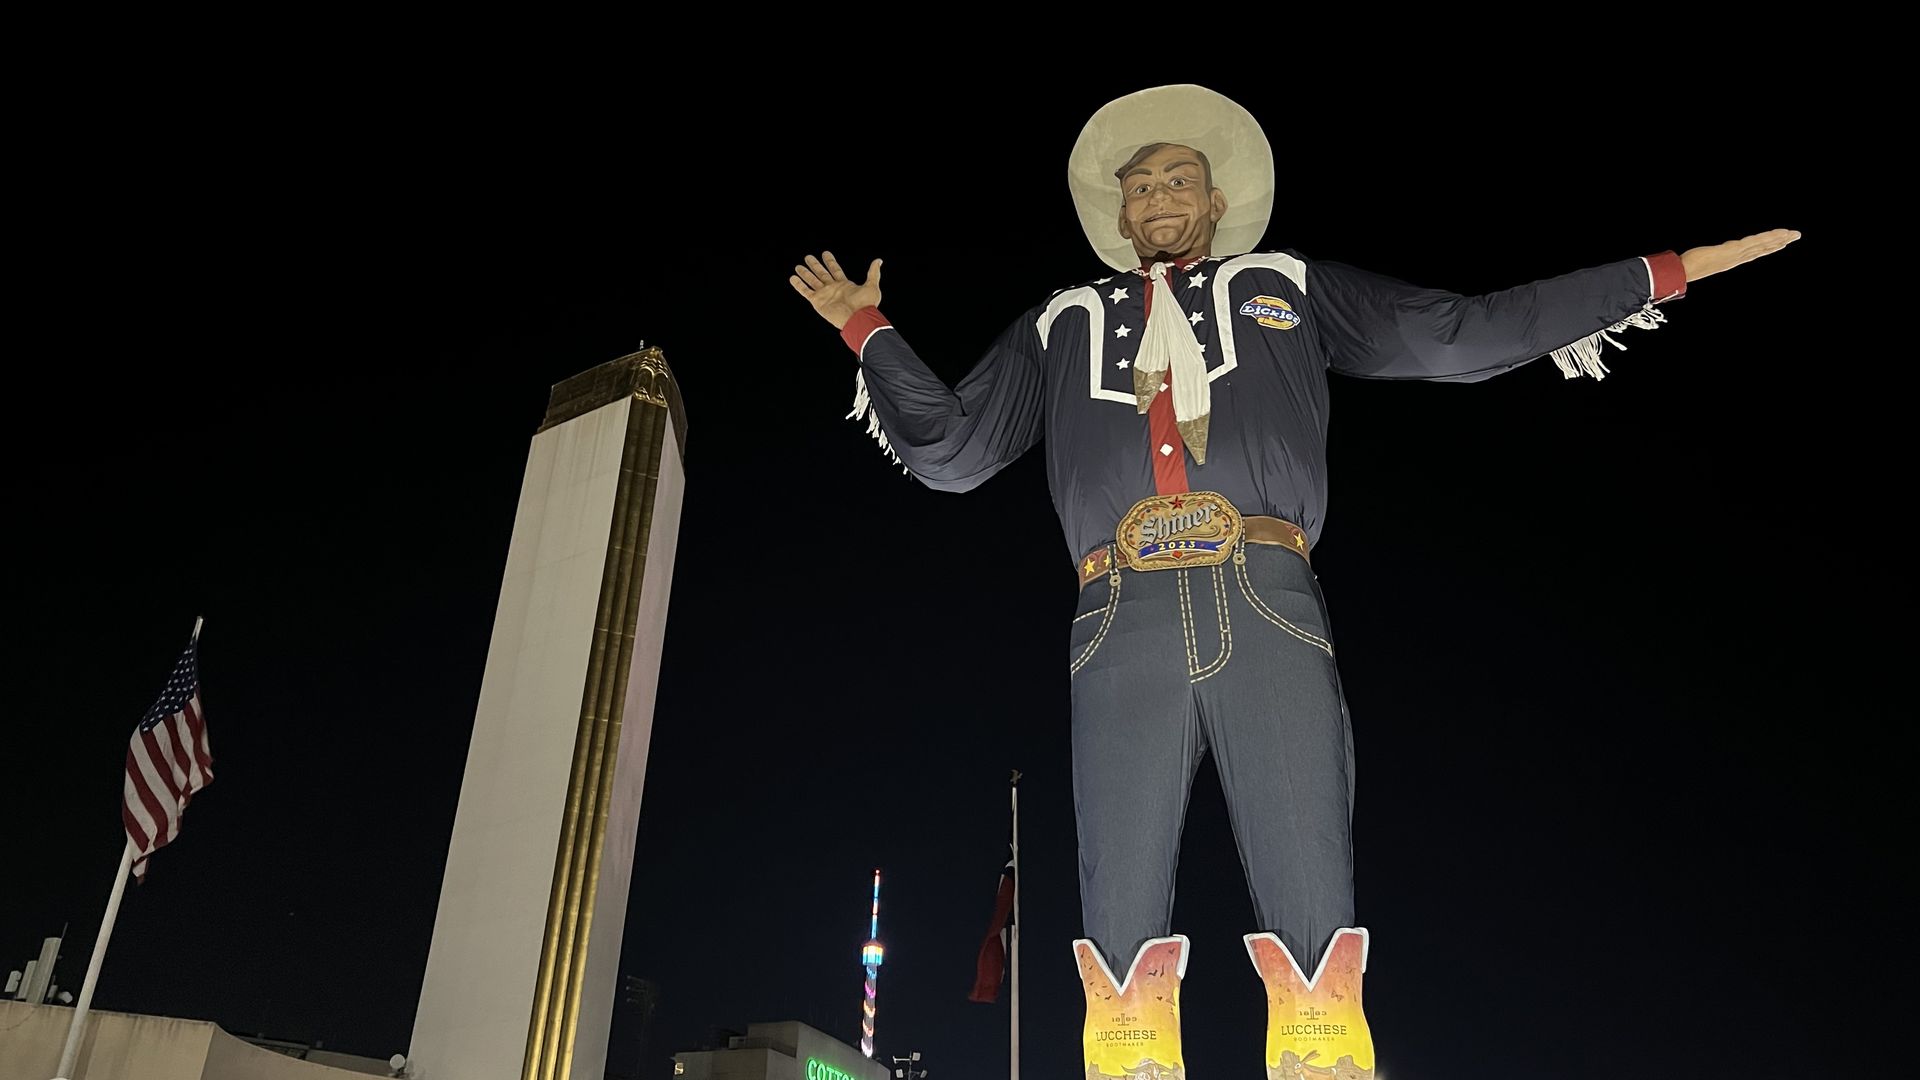 The giant Big Tex next to the Tower Building at the State Fair of Texas at night